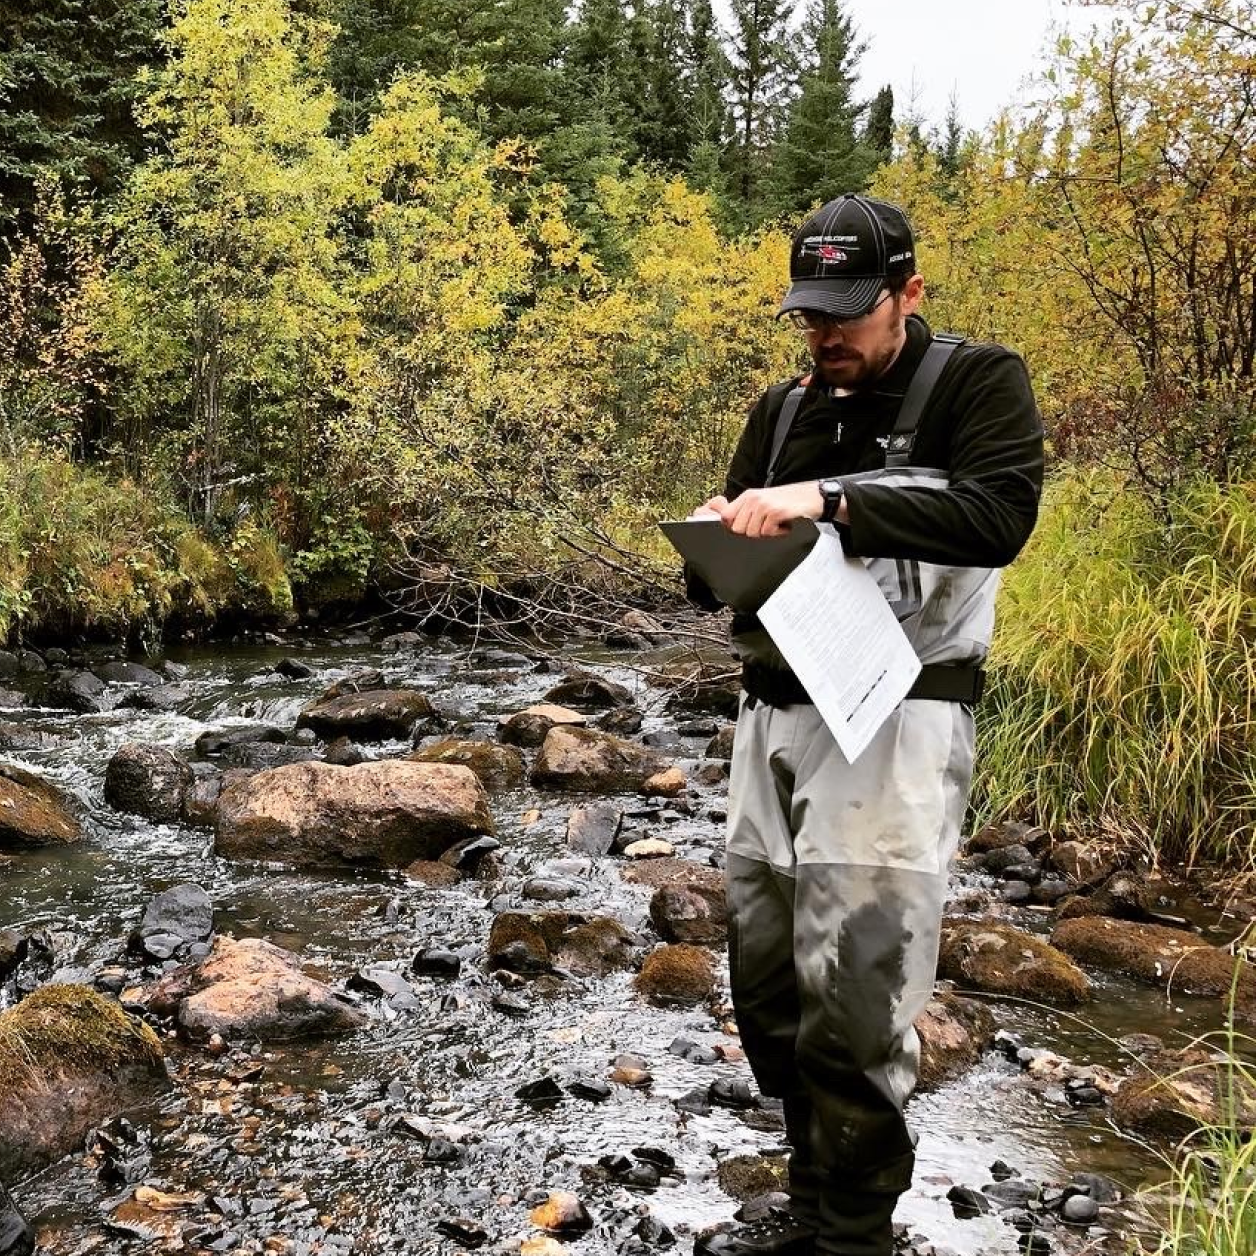 Person wearing glasses, a black cap, black shirt and light grey overalls standing in a shallow stream surrounded by rocks and trees. They are writing on a clipboard.